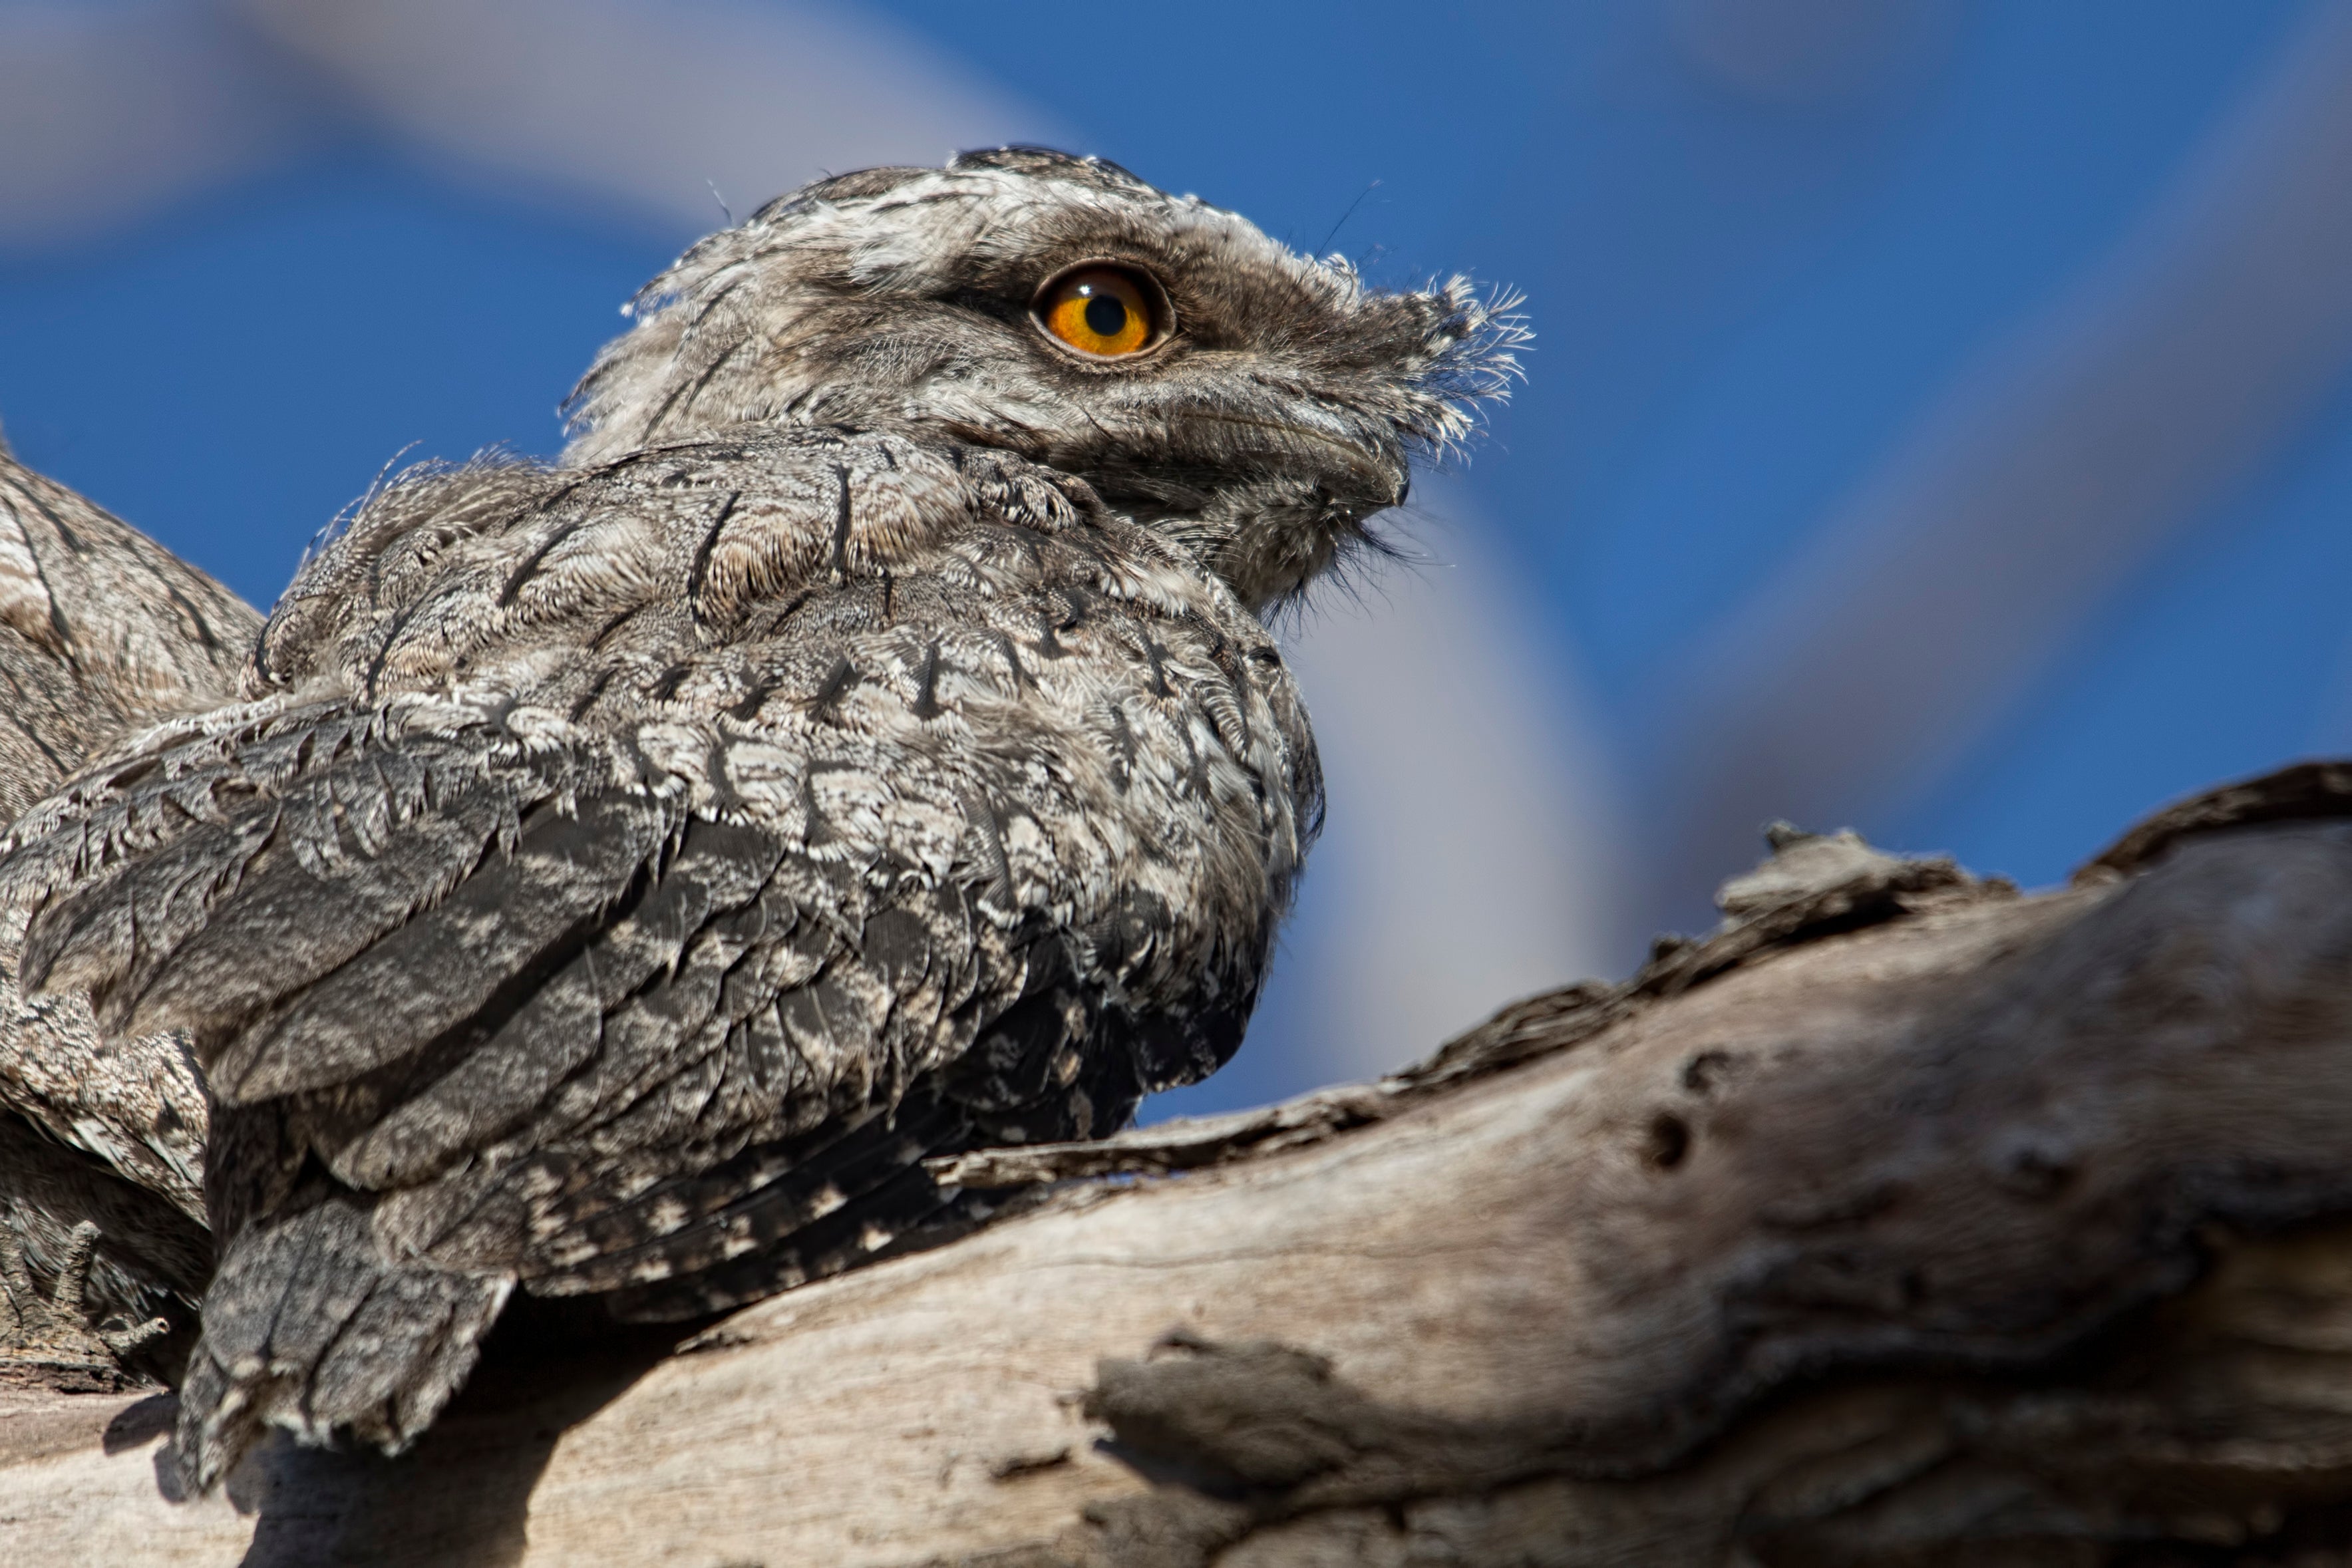 The frogmouth has been termed the ‘most Instagrammable bird’ by researchers